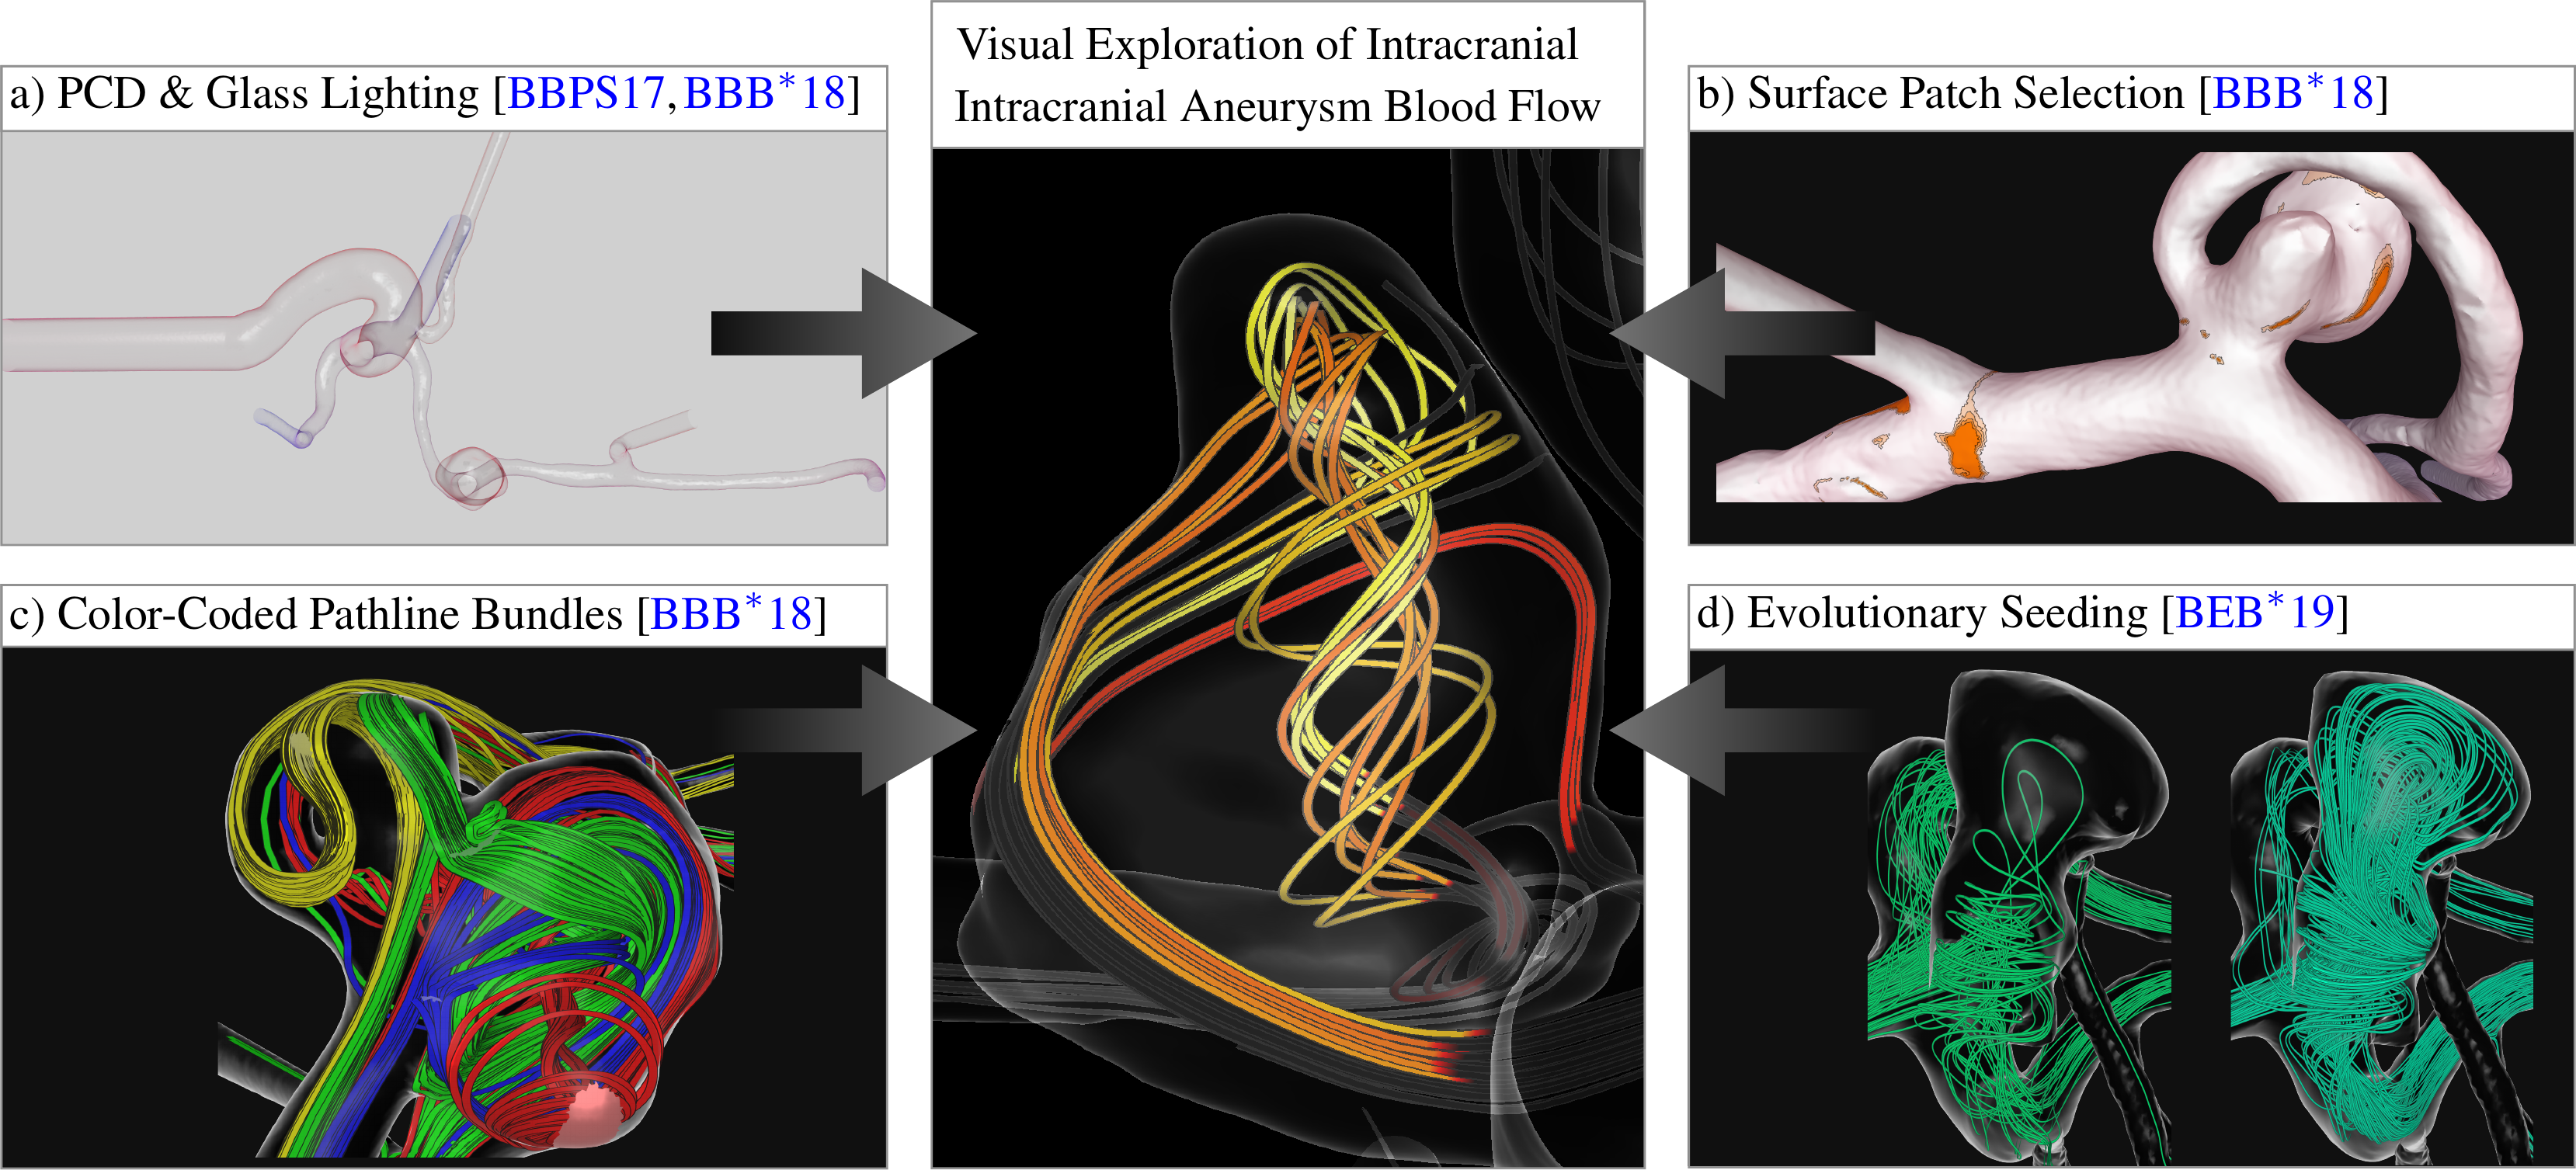 Visual exploration of intracranial aneurysm blood flow adapted to the clinical researcher